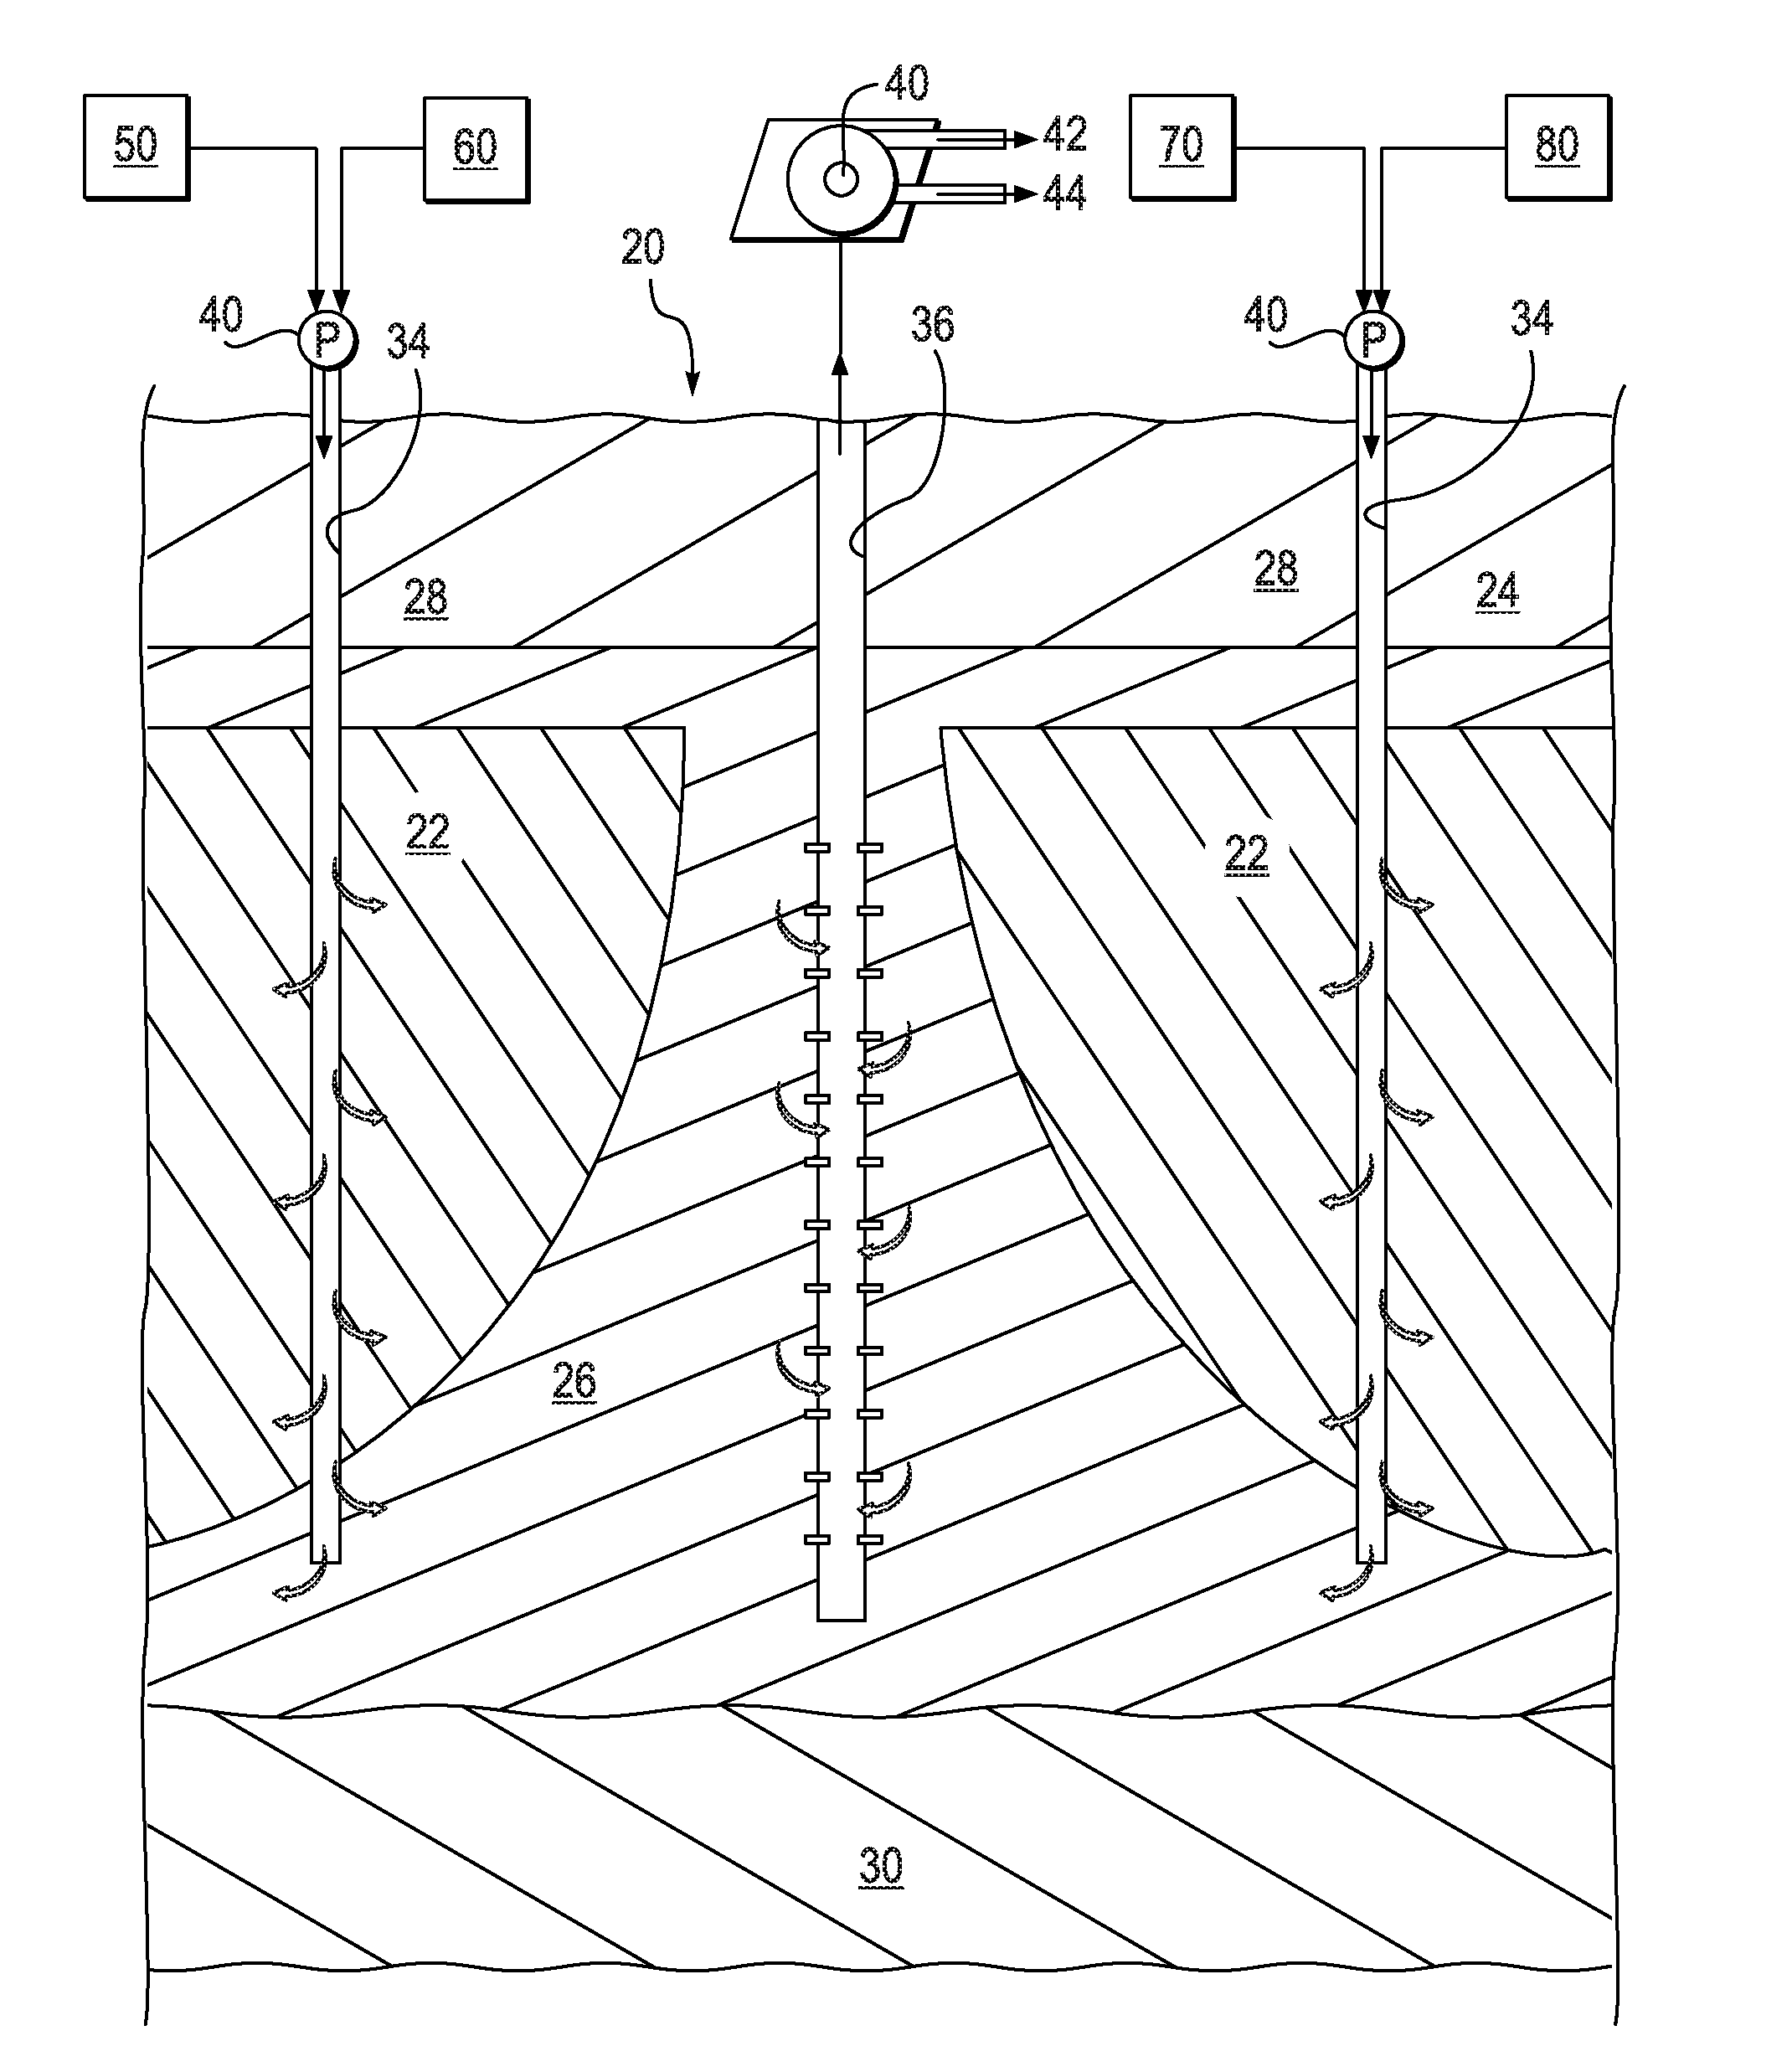 Method and system for producing hydrocarbons from a hydrate reservoir using available waste heat